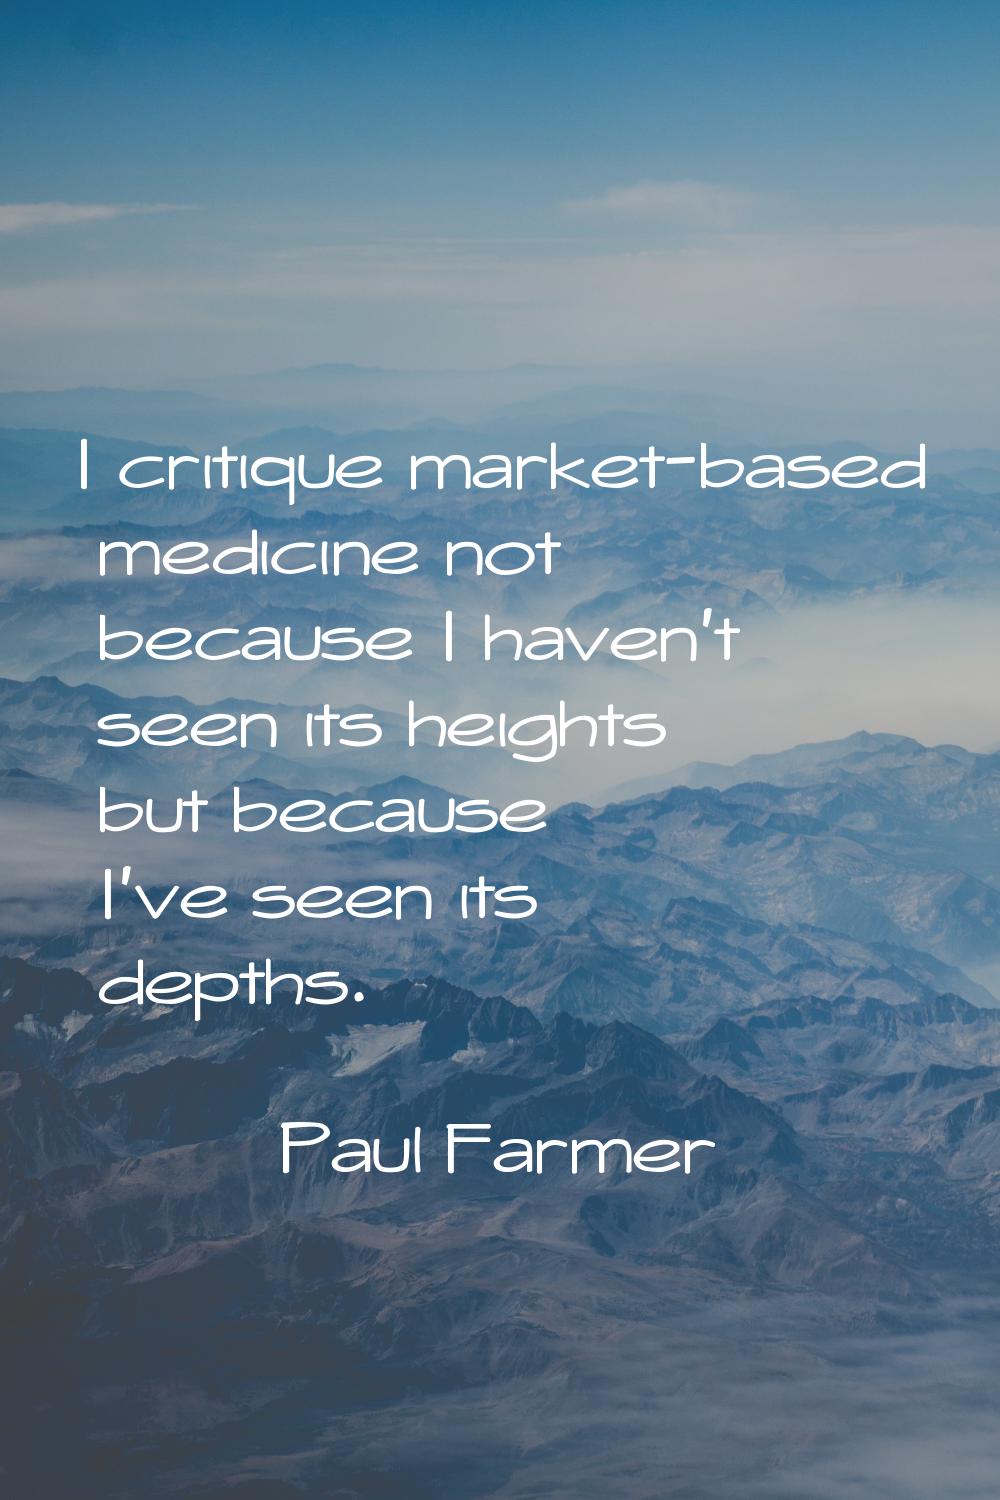 I critique market-based medicine not because I haven't seen its heights but because I've seen its d